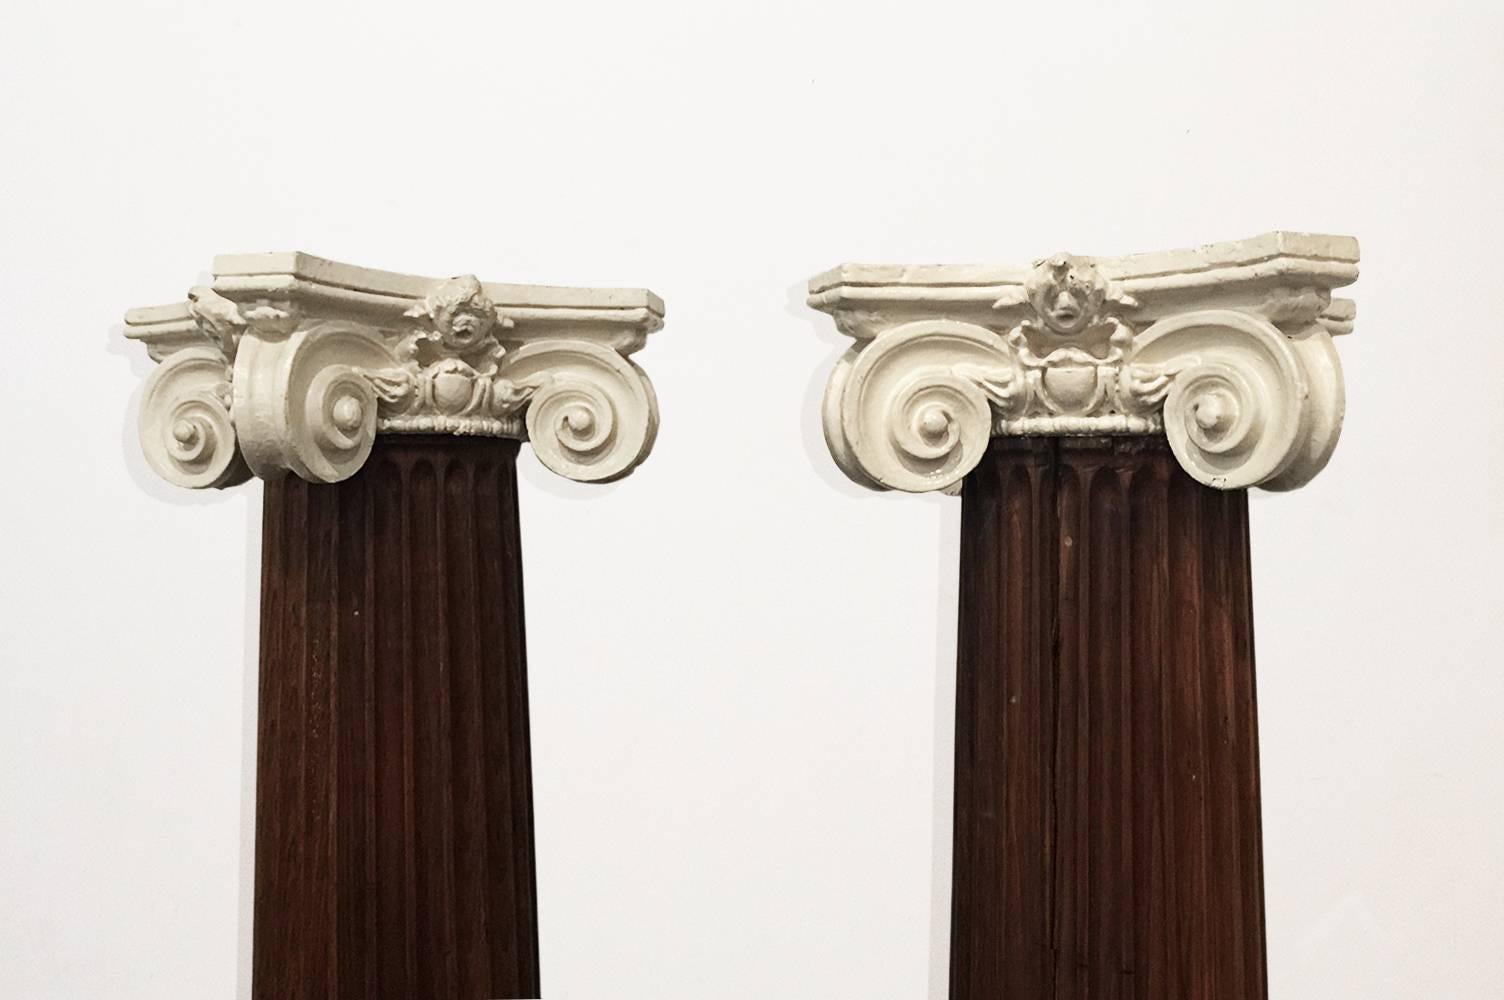 Awesome oak pillar with cast plaster Ionic style capital. Constructed from eight carved oak planks connected with dove tail joints. Interior is hollow with round insert in top to receive the capital. Stately piece for indoor or outdoor use. One